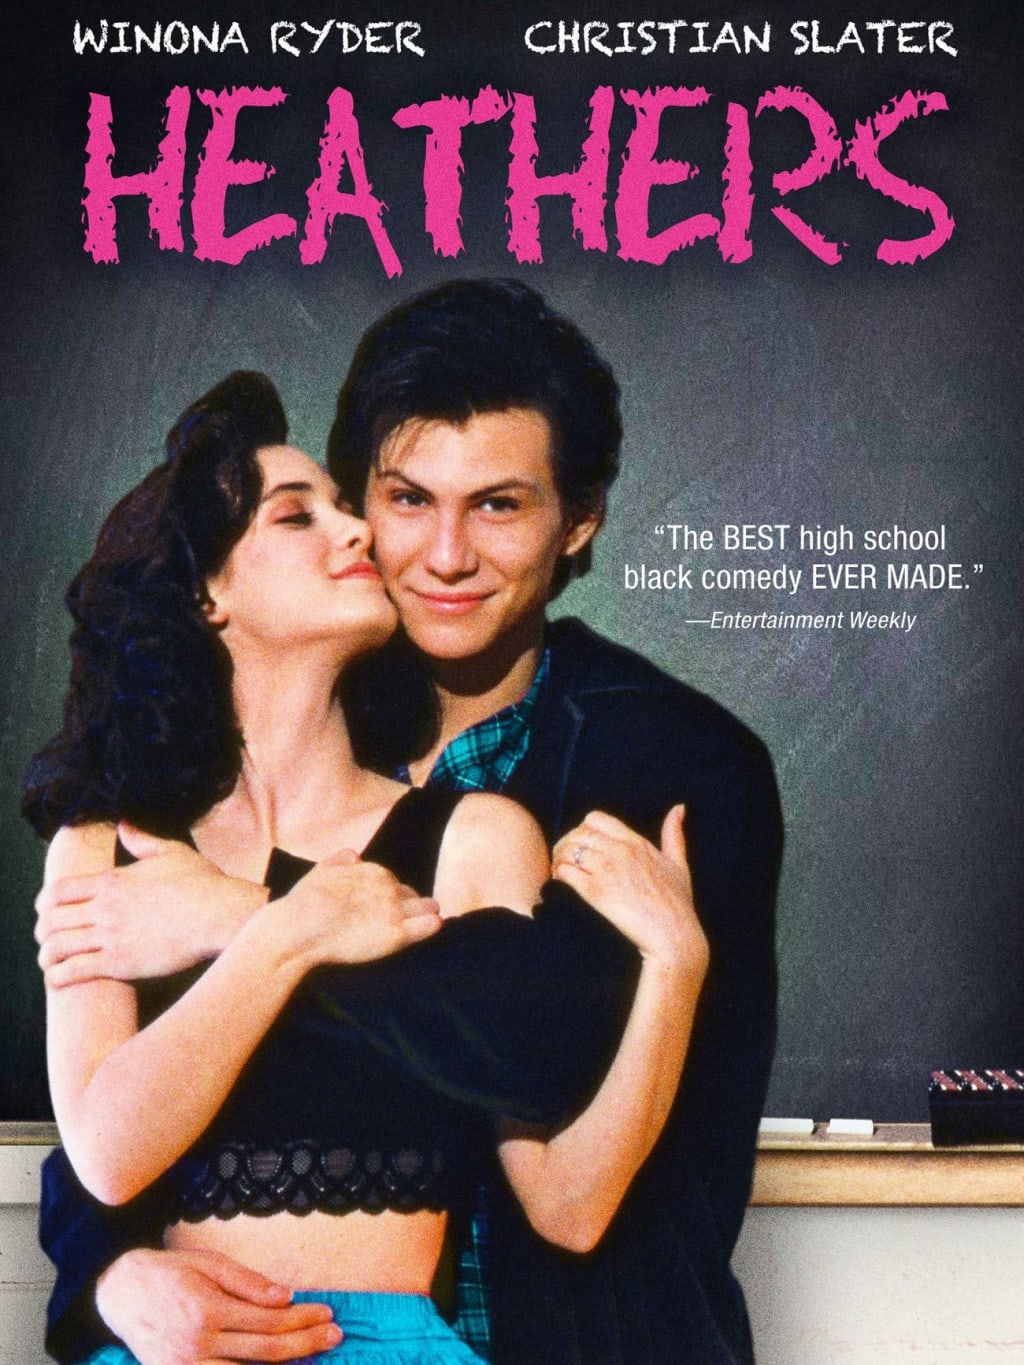 Heathers: Film and Musical | Geeks